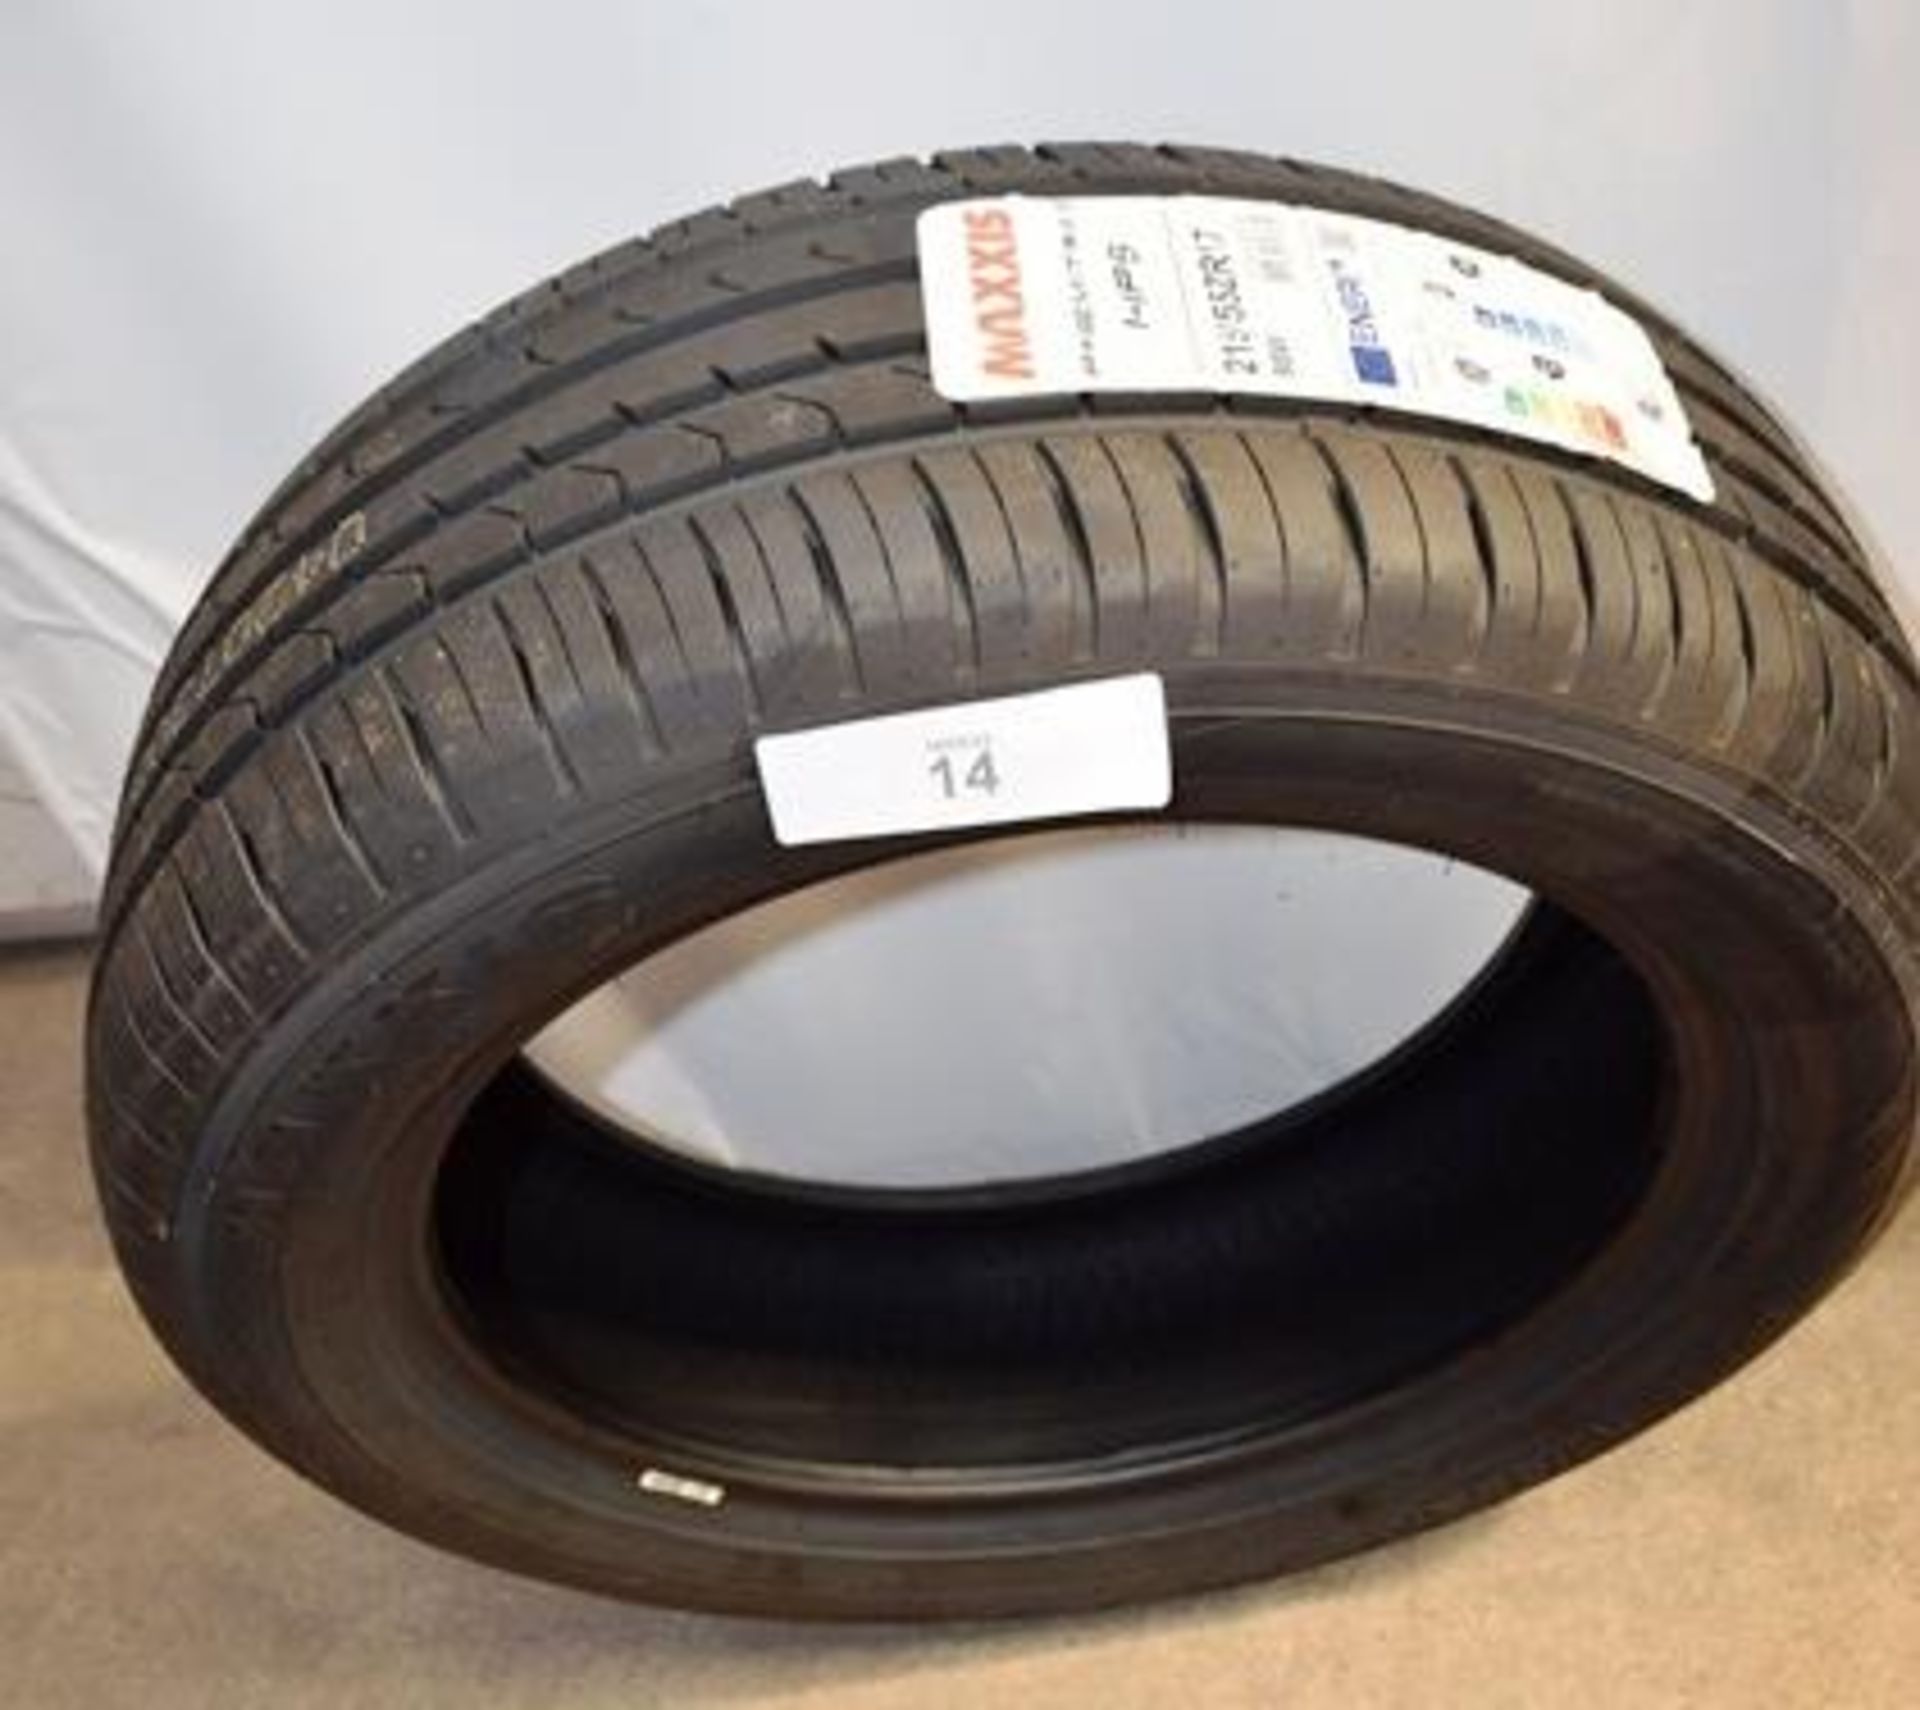 1 x Maxxis Premitra 5 HP5 tyre, size 215/55ZR17 98W - New with label (GS1)